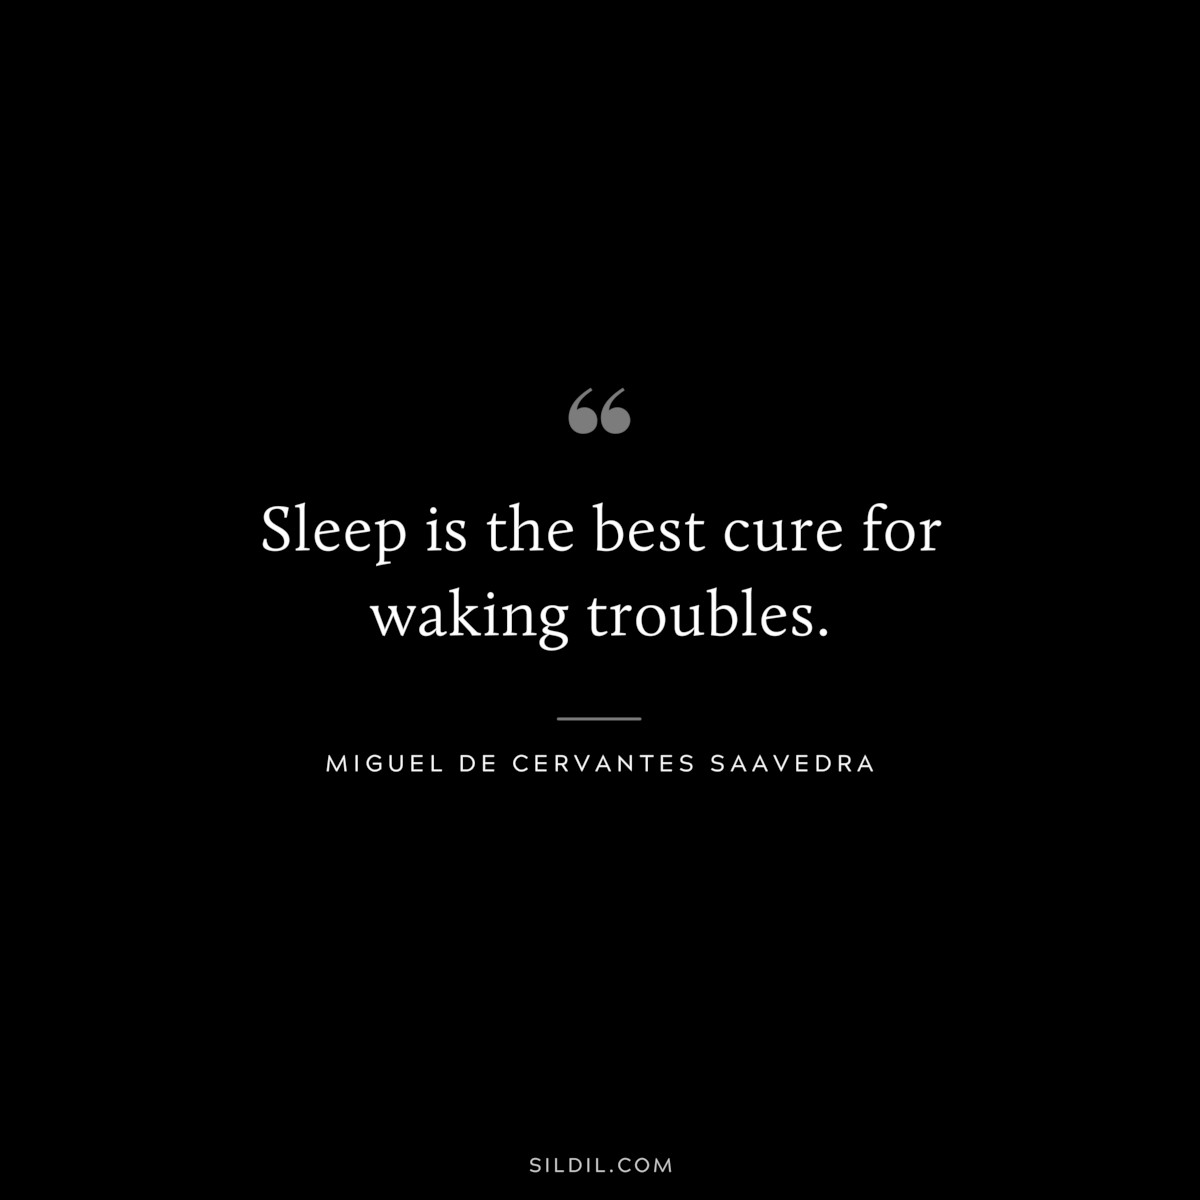 Sleep is the best cure for waking troubles. ― Miguel de Cervantes Saavedra